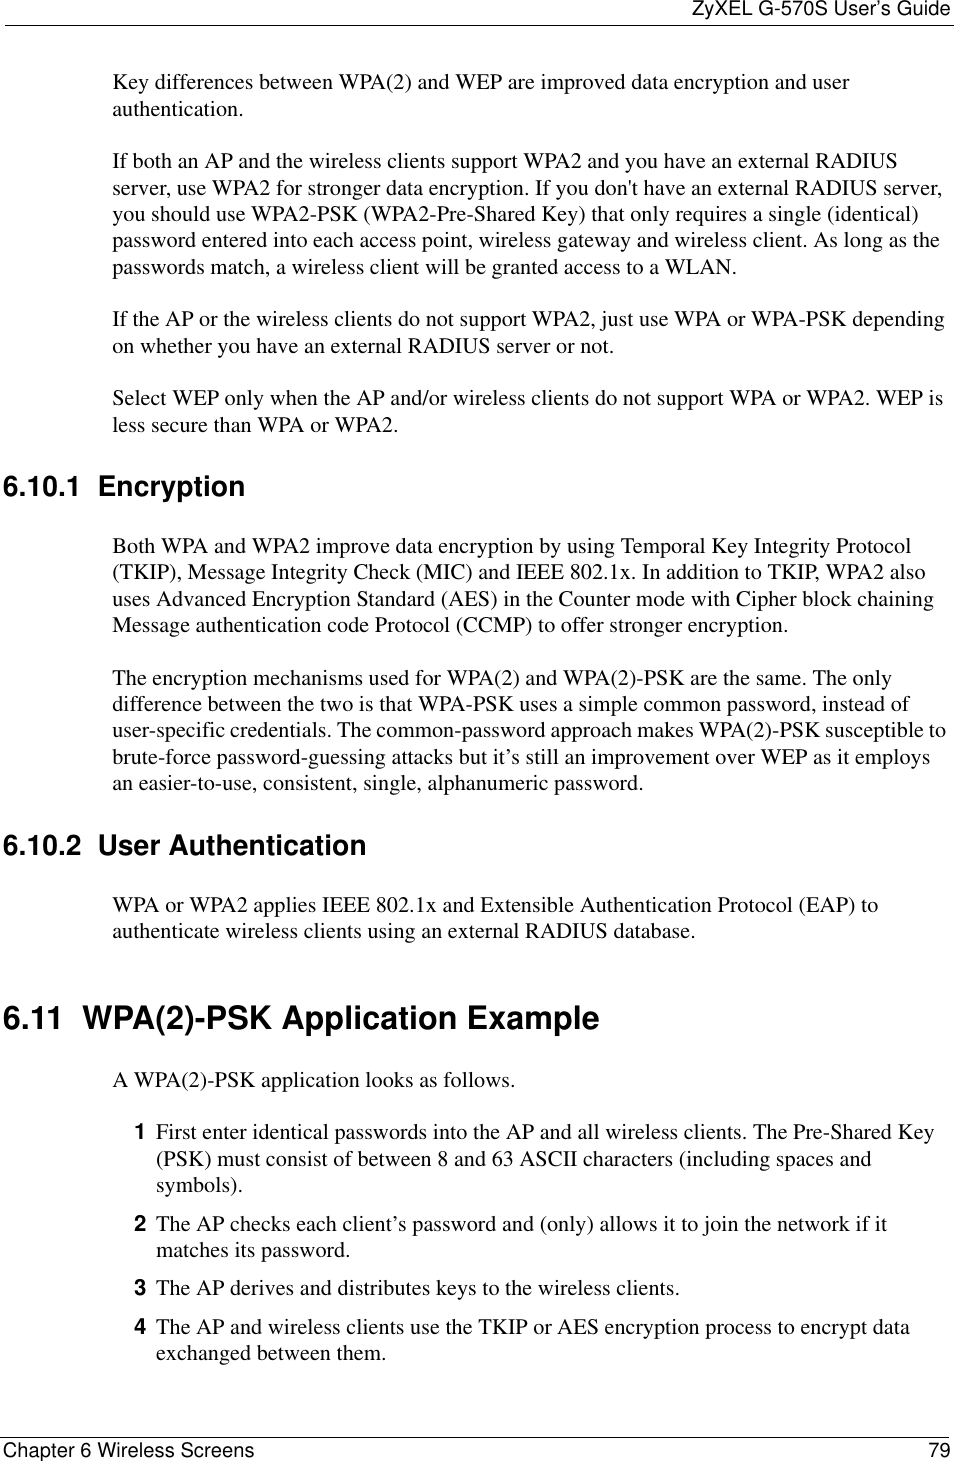 ZyXEL G-570S User’s GuideChapter 6 Wireless Screens 79Key differences between WPA(2) and WEP are improved data encryption and user authentication.If both an AP and the wireless clients support WPA2 and you have an external RADIUS server, use WPA2 for stronger data encryption. If you don&apos;t have an external RADIUS server, you should use WPA2-PSK (WPA2-Pre-Shared Key) that only requires a single (identical) password entered into each access point, wireless gateway and wireless client. As long as the passwords match, a wireless client will be granted access to a WLAN. If the AP or the wireless clients do not support WPA2, just use WPA or WPA-PSK depending on whether you have an external RADIUS server or not.Select WEP only when the AP and/or wireless clients do not support WPA or WPA2. WEP is less secure than WPA or WPA2.6.10.1  Encryption Both WPA and WPA2 improve data encryption by using Temporal Key Integrity Protocol (TKIP), Message Integrity Check (MIC) and IEEE 802.1x. In addition to TKIP, WPA2 also uses Advanced Encryption Standard (AES) in the Counter mode with Cipher block chaining Message authentication code Protocol (CCMP) to offer stronger encryption.The encryption mechanisms used for WPA(2) and WPA(2)-PSK are the same. The only difference between the two is that WPA-PSK uses a simple common password, instead of user-specific credentials. The common-password approach makes WPA(2)-PSK susceptible to brute-force password-guessing attacks but it’s still an improvement over WEP as it employs an easier-to-use, consistent, single, alphanumeric password.6.10.2  User Authentication WPA or WPA2 applies IEEE 802.1x and Extensible Authentication Protocol (EAP) to authenticate wireless clients using an external RADIUS database. 6.11  WPA(2)-PSK Application ExampleA WPA(2)-PSK application looks as follows.1First enter identical passwords into the AP and all wireless clients. The Pre-Shared Key (PSK) must consist of between 8 and 63 ASCII characters (including spaces and symbols).2The AP checks each client’s password and (only) allows it to join the network if it matches its password.3The AP derives and distributes keys to the wireless clients.4The AP and wireless clients use the TKIP or AES encryption process to encrypt data exchanged between them.